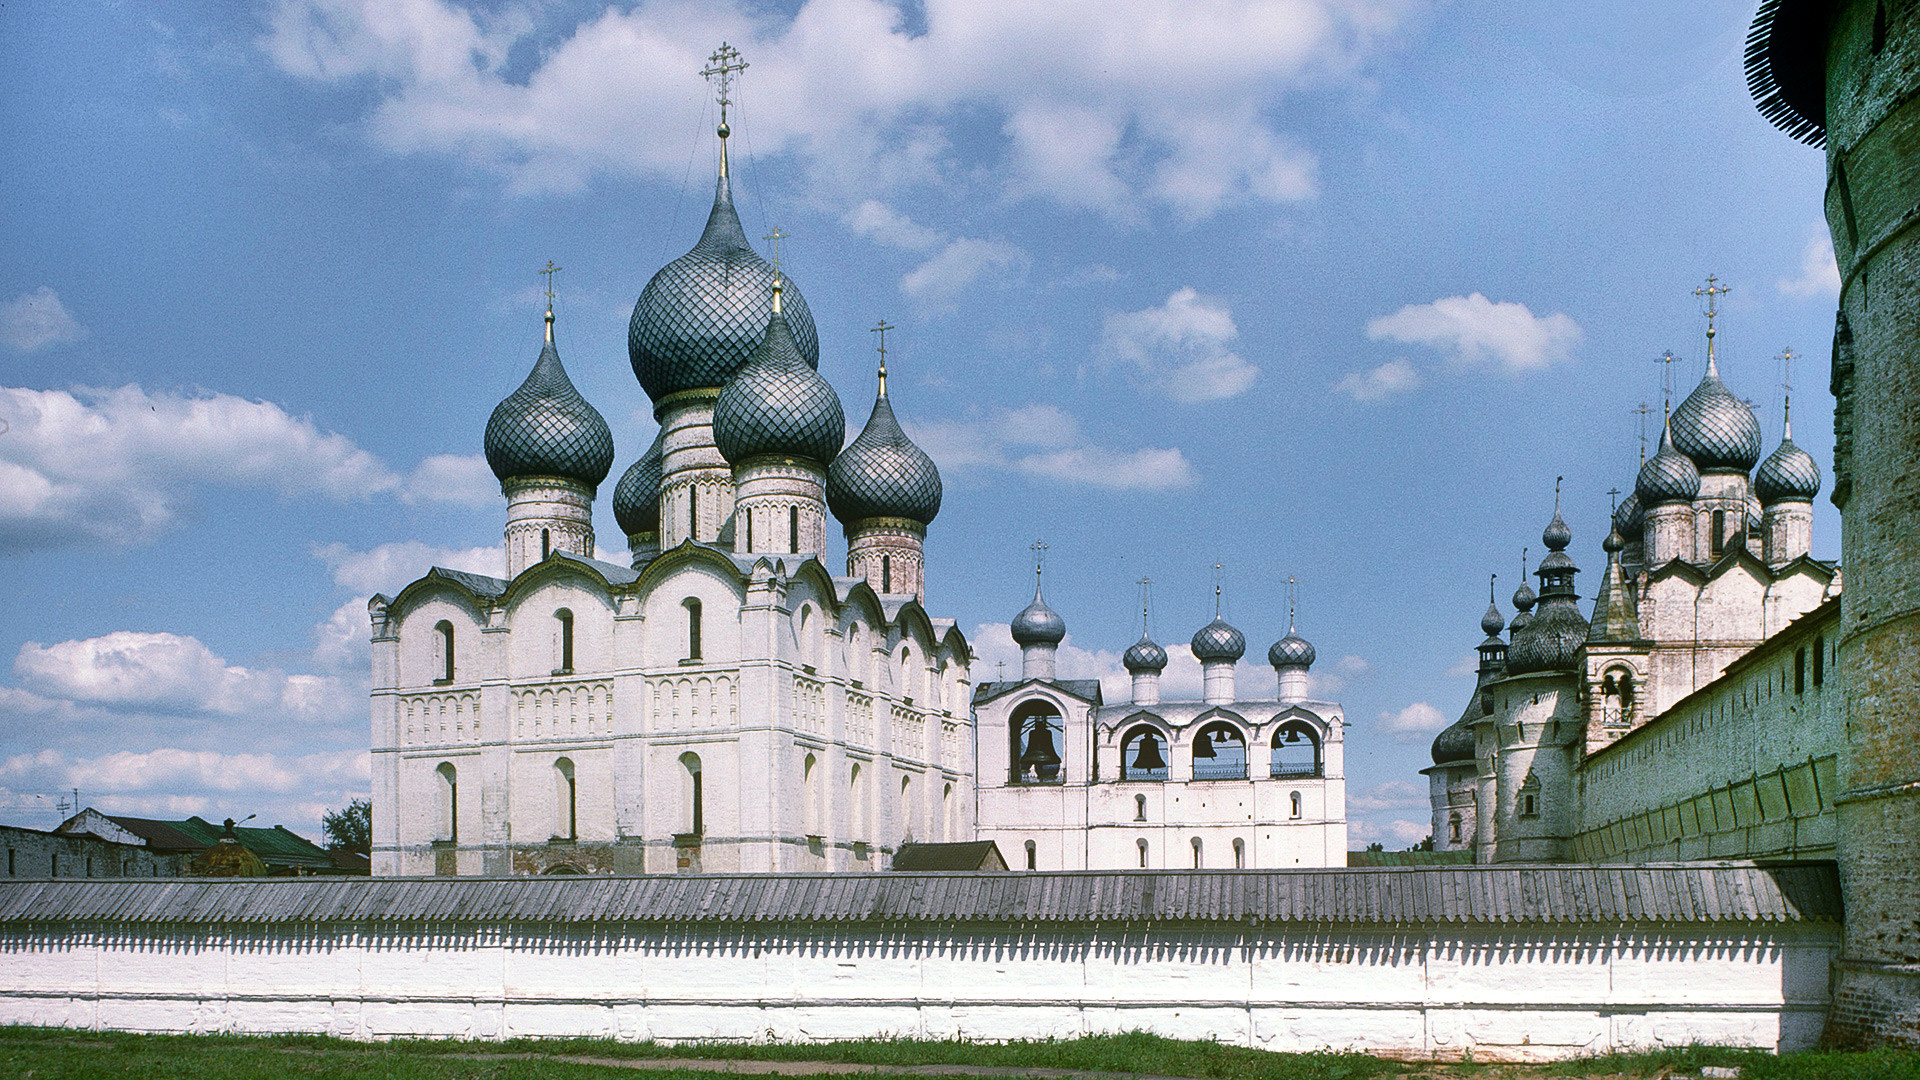 Rostov. Cathedral compound, southwest view. From left: Dormition Cathedral,  belfry, north wall of Kremlin, Church of Resurrection over North Gate. June 28, 1995